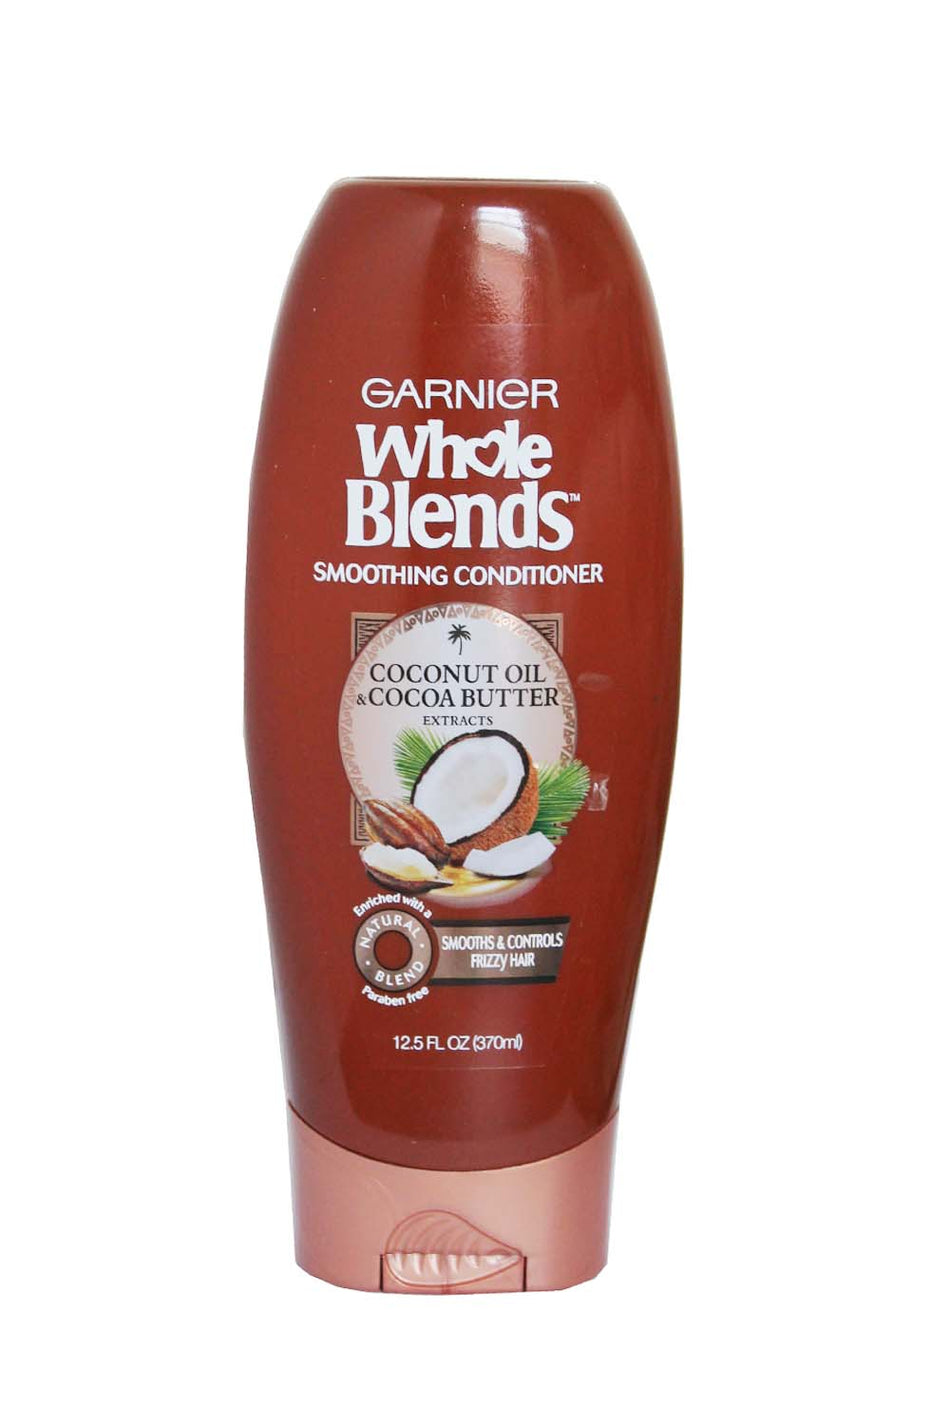 Garnier Whole Blends Smoothing Conditioner